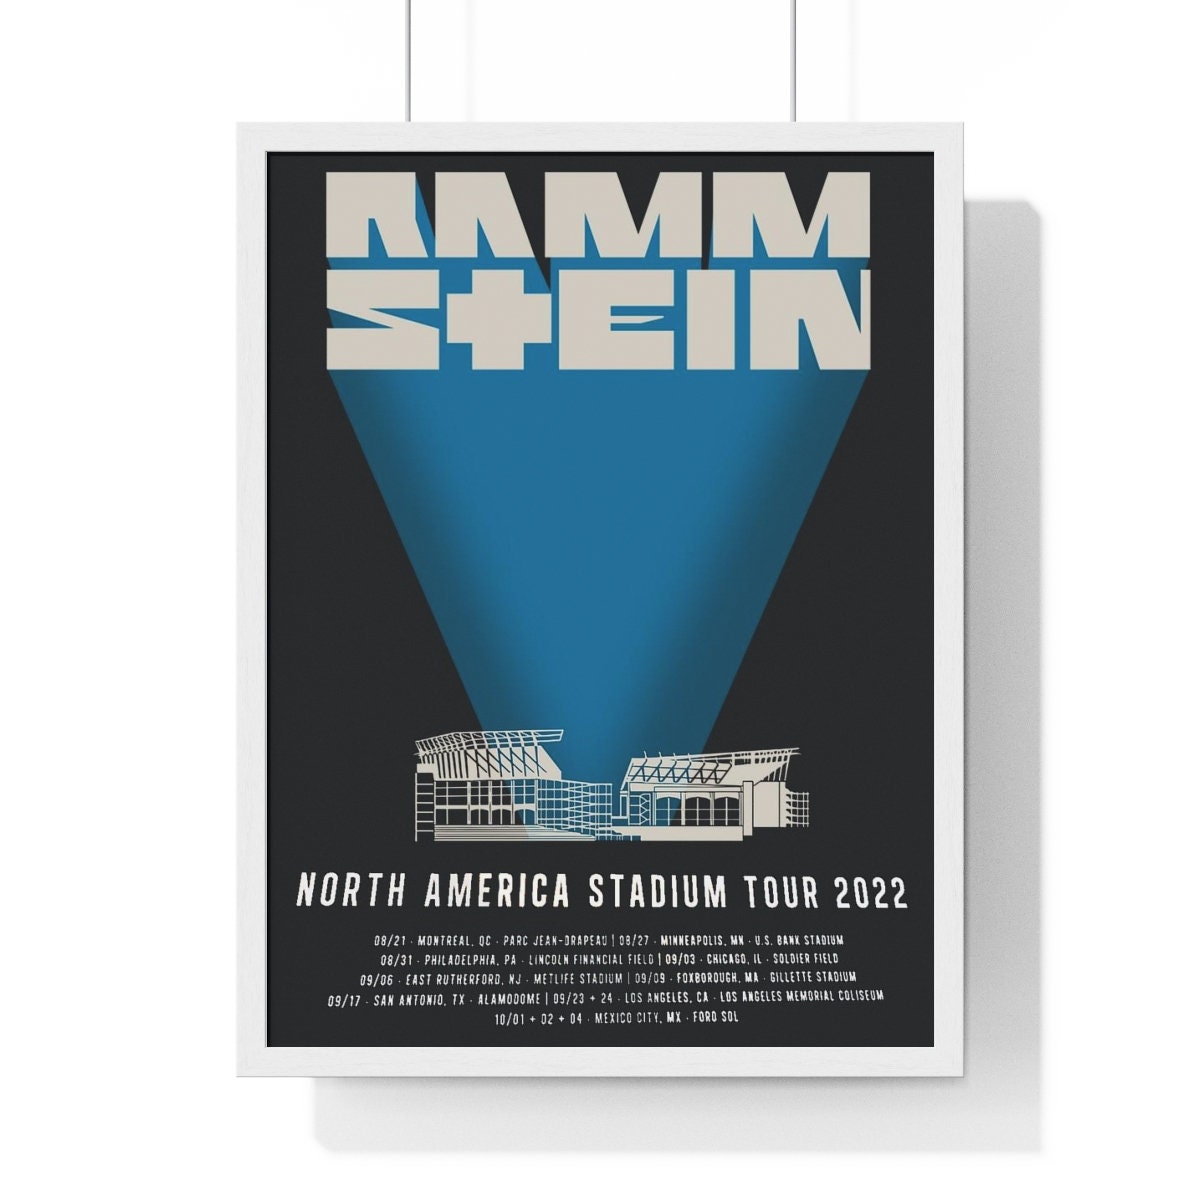 rammstein north american tour poster